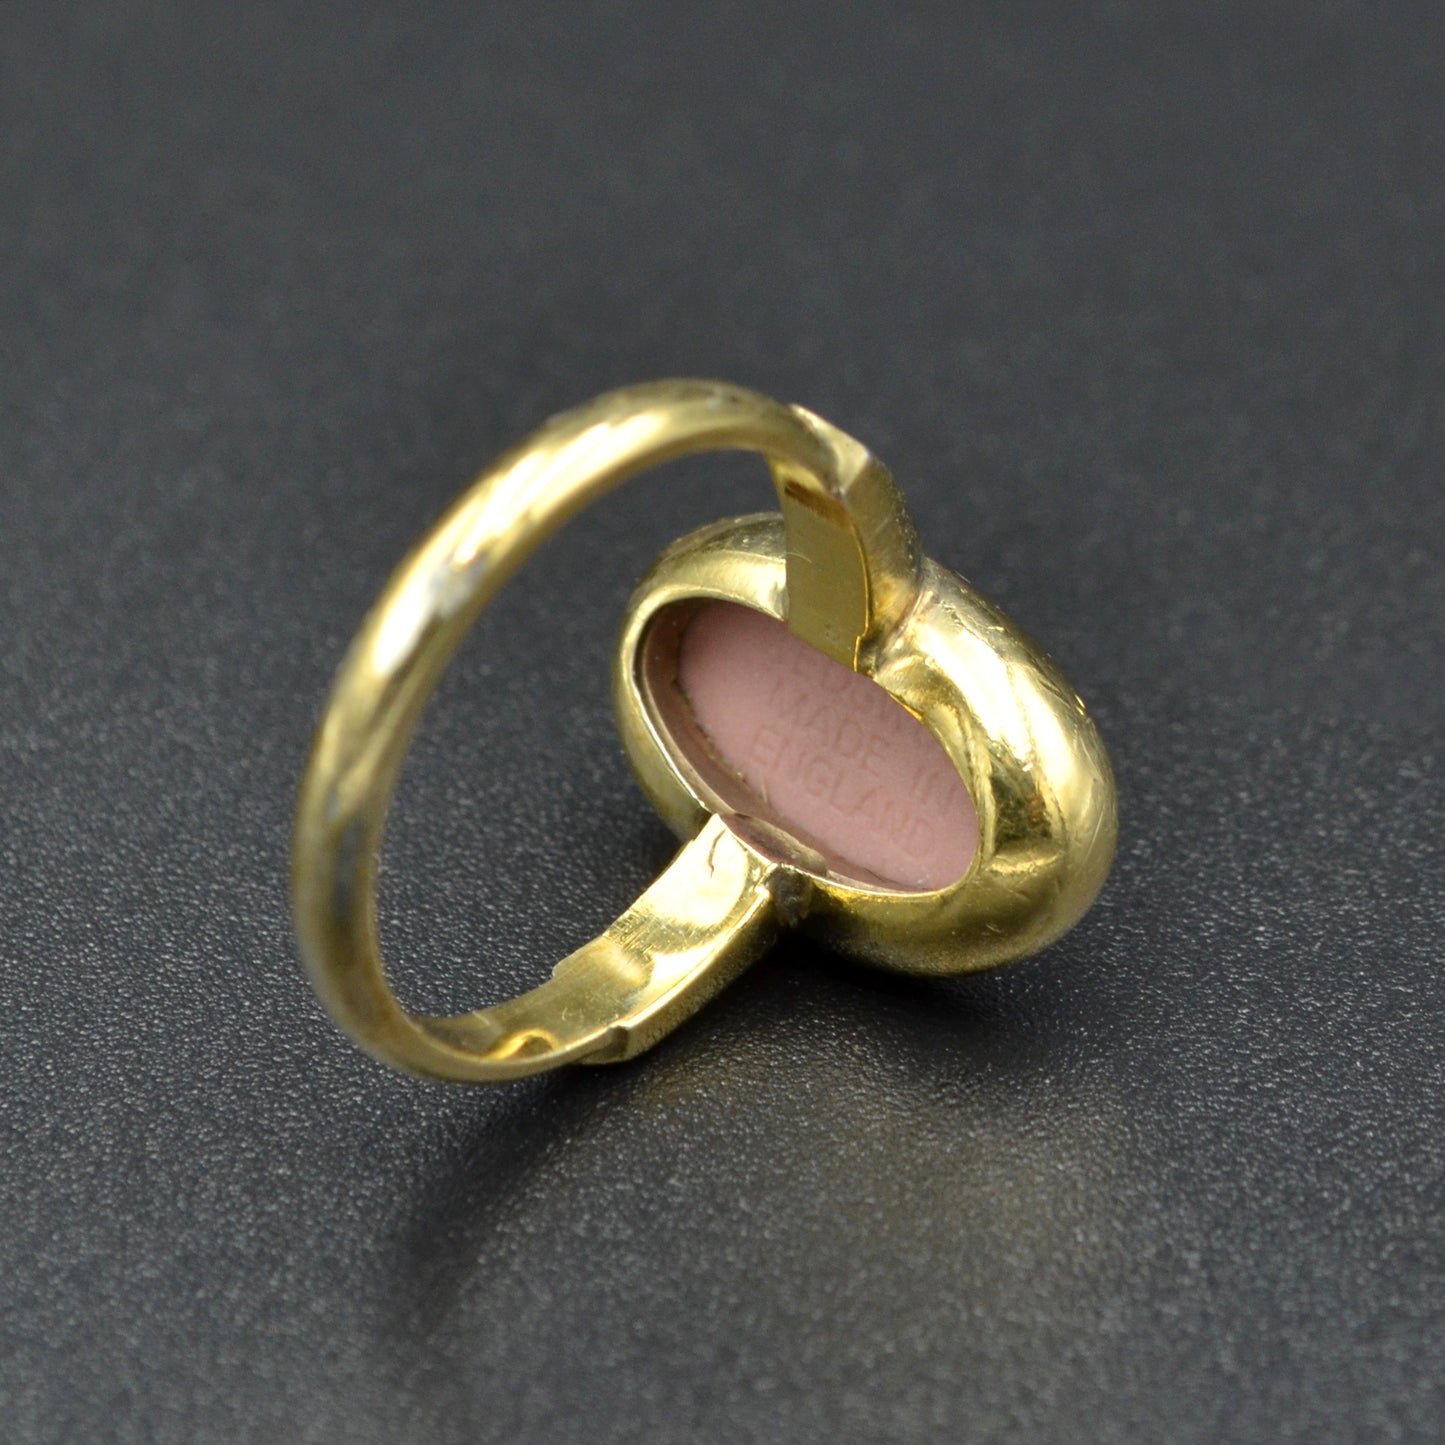 Vintage Rare Artemis Pink Wedgewood and Gold-plated Silver Ring